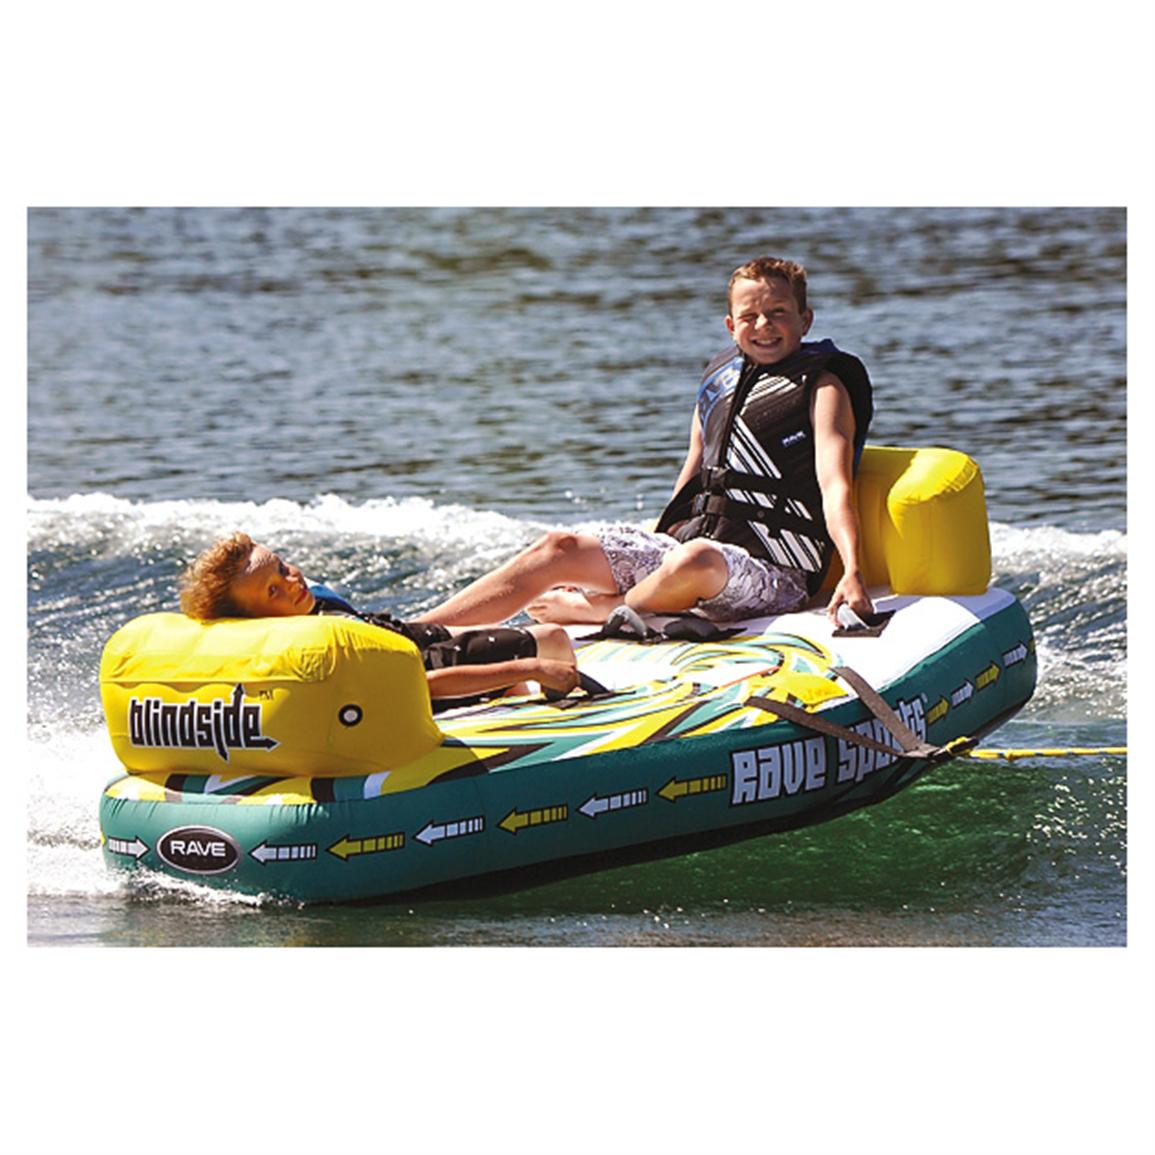 Rave Sports Blindside 2Person Towable 292642, Tubes & Towables at